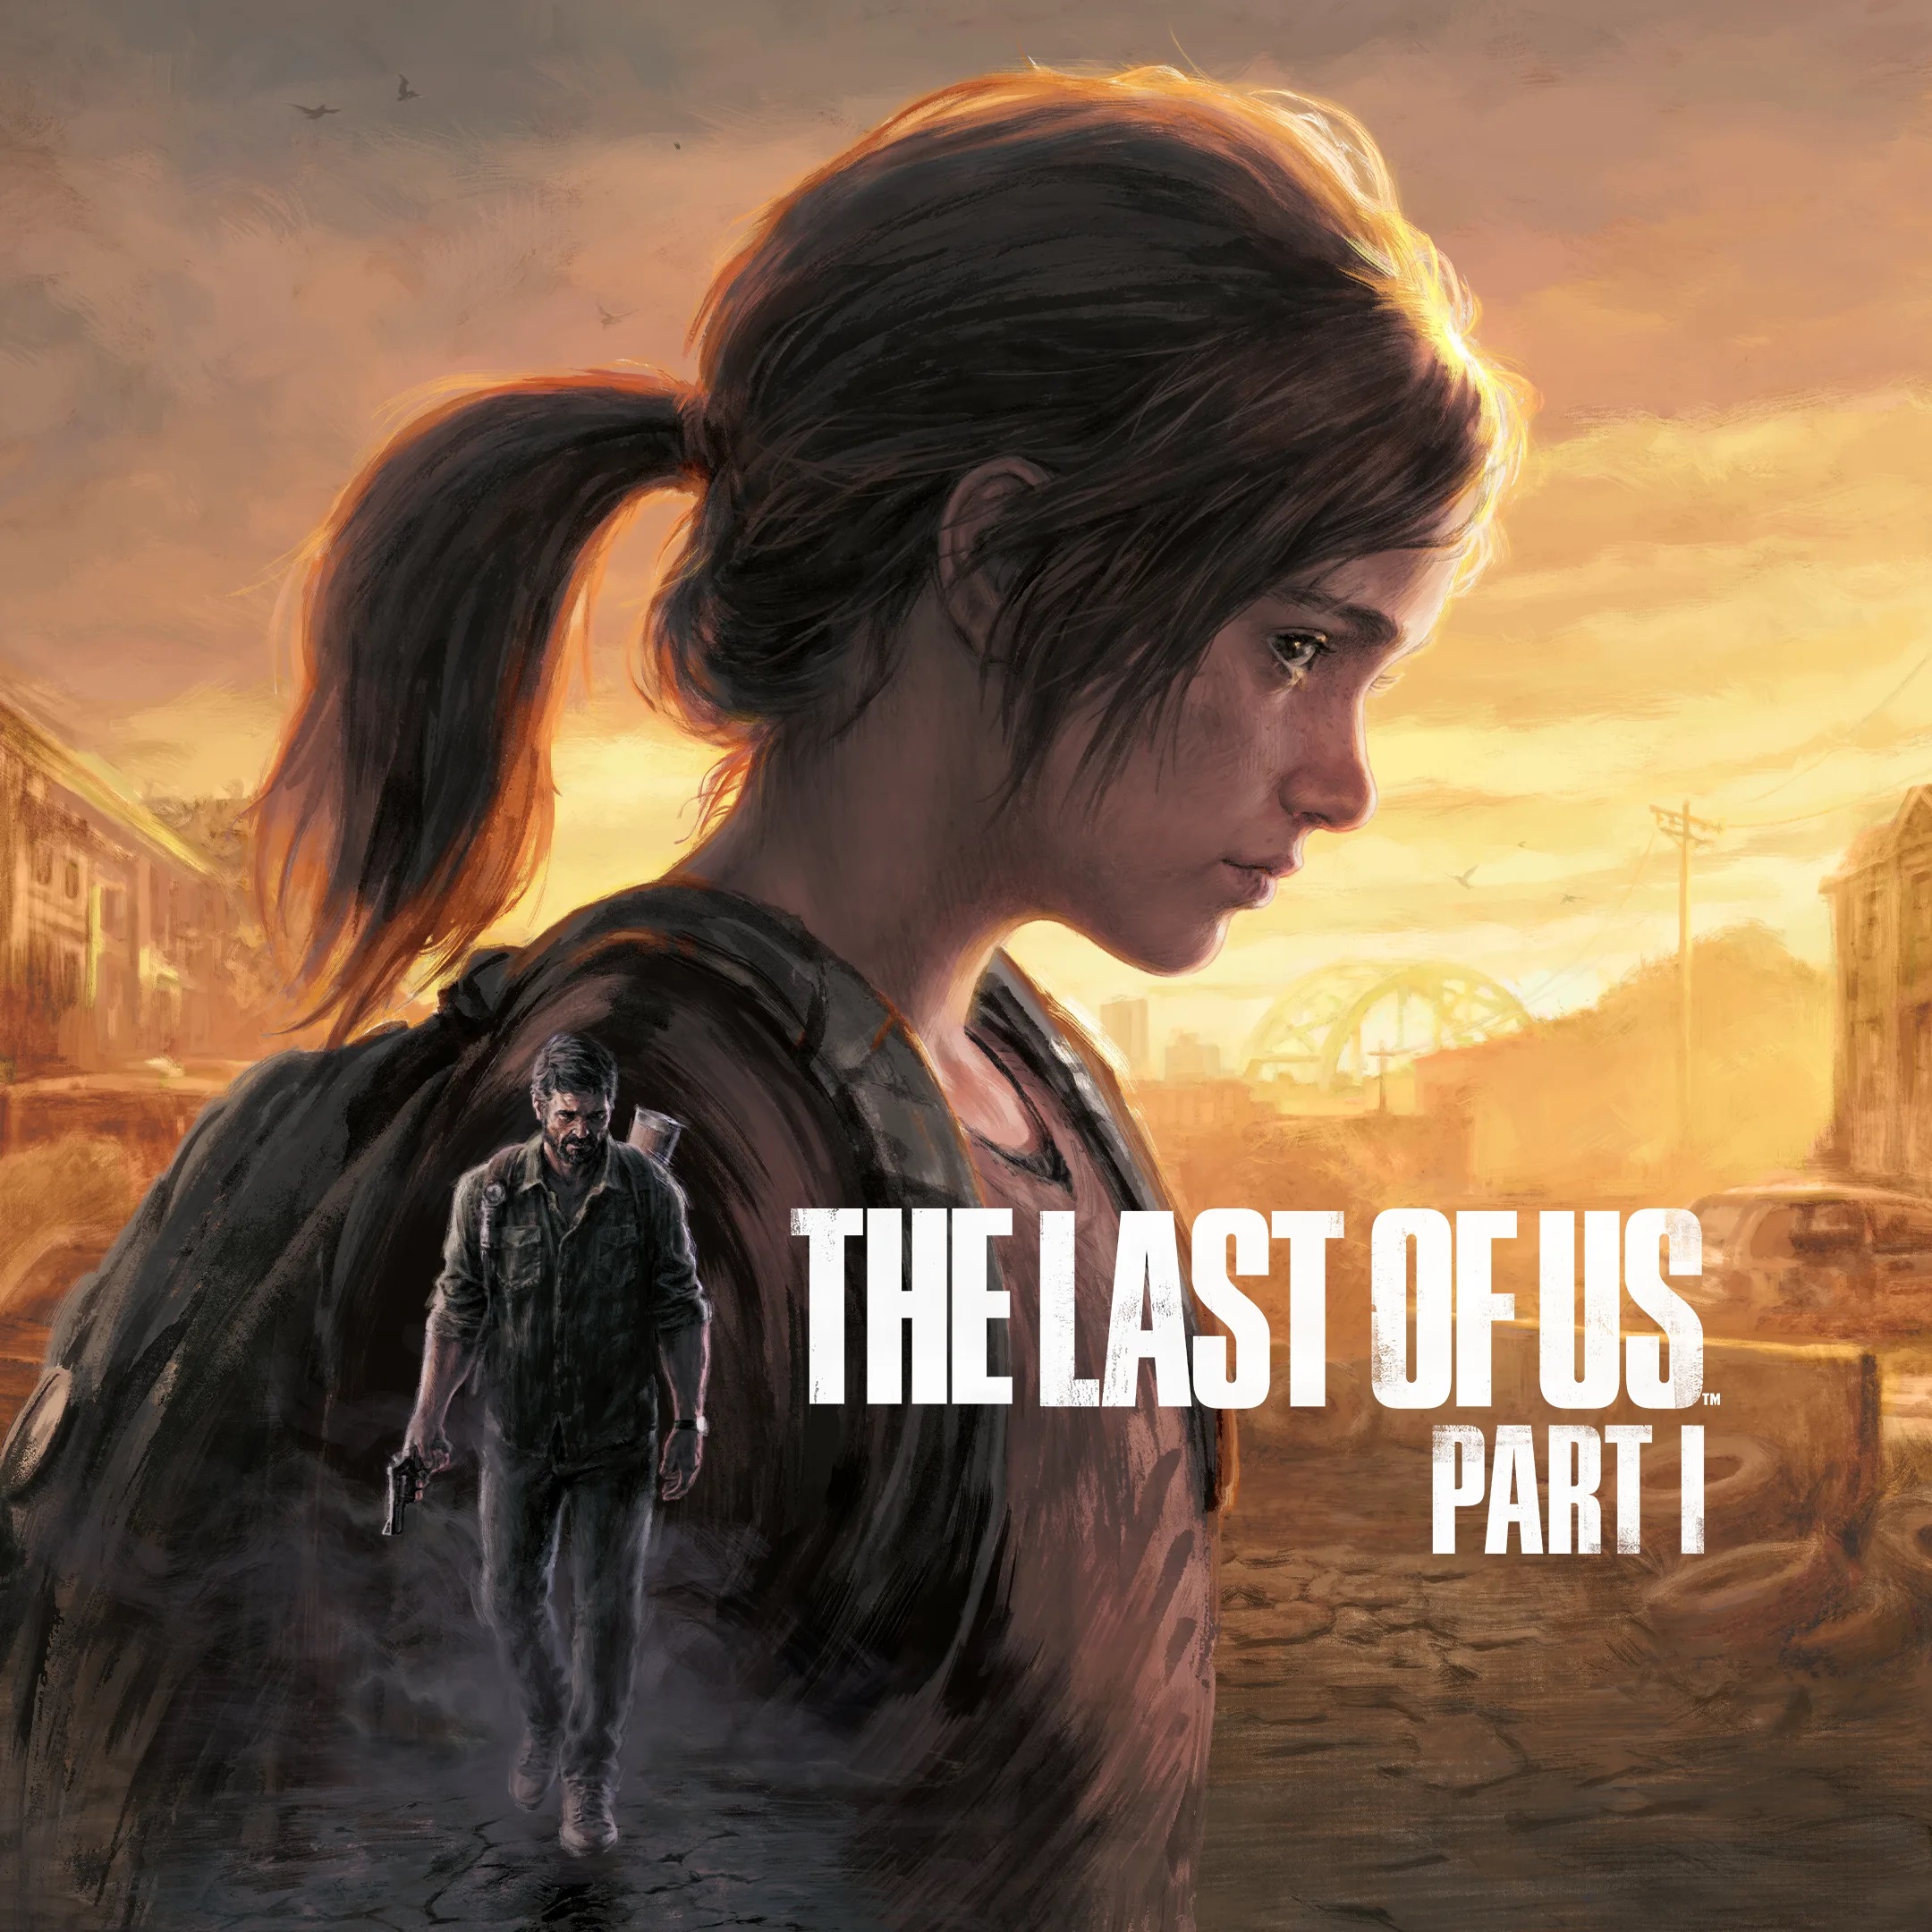 The Last of Us Day 2021 Will Reveal All-New Content